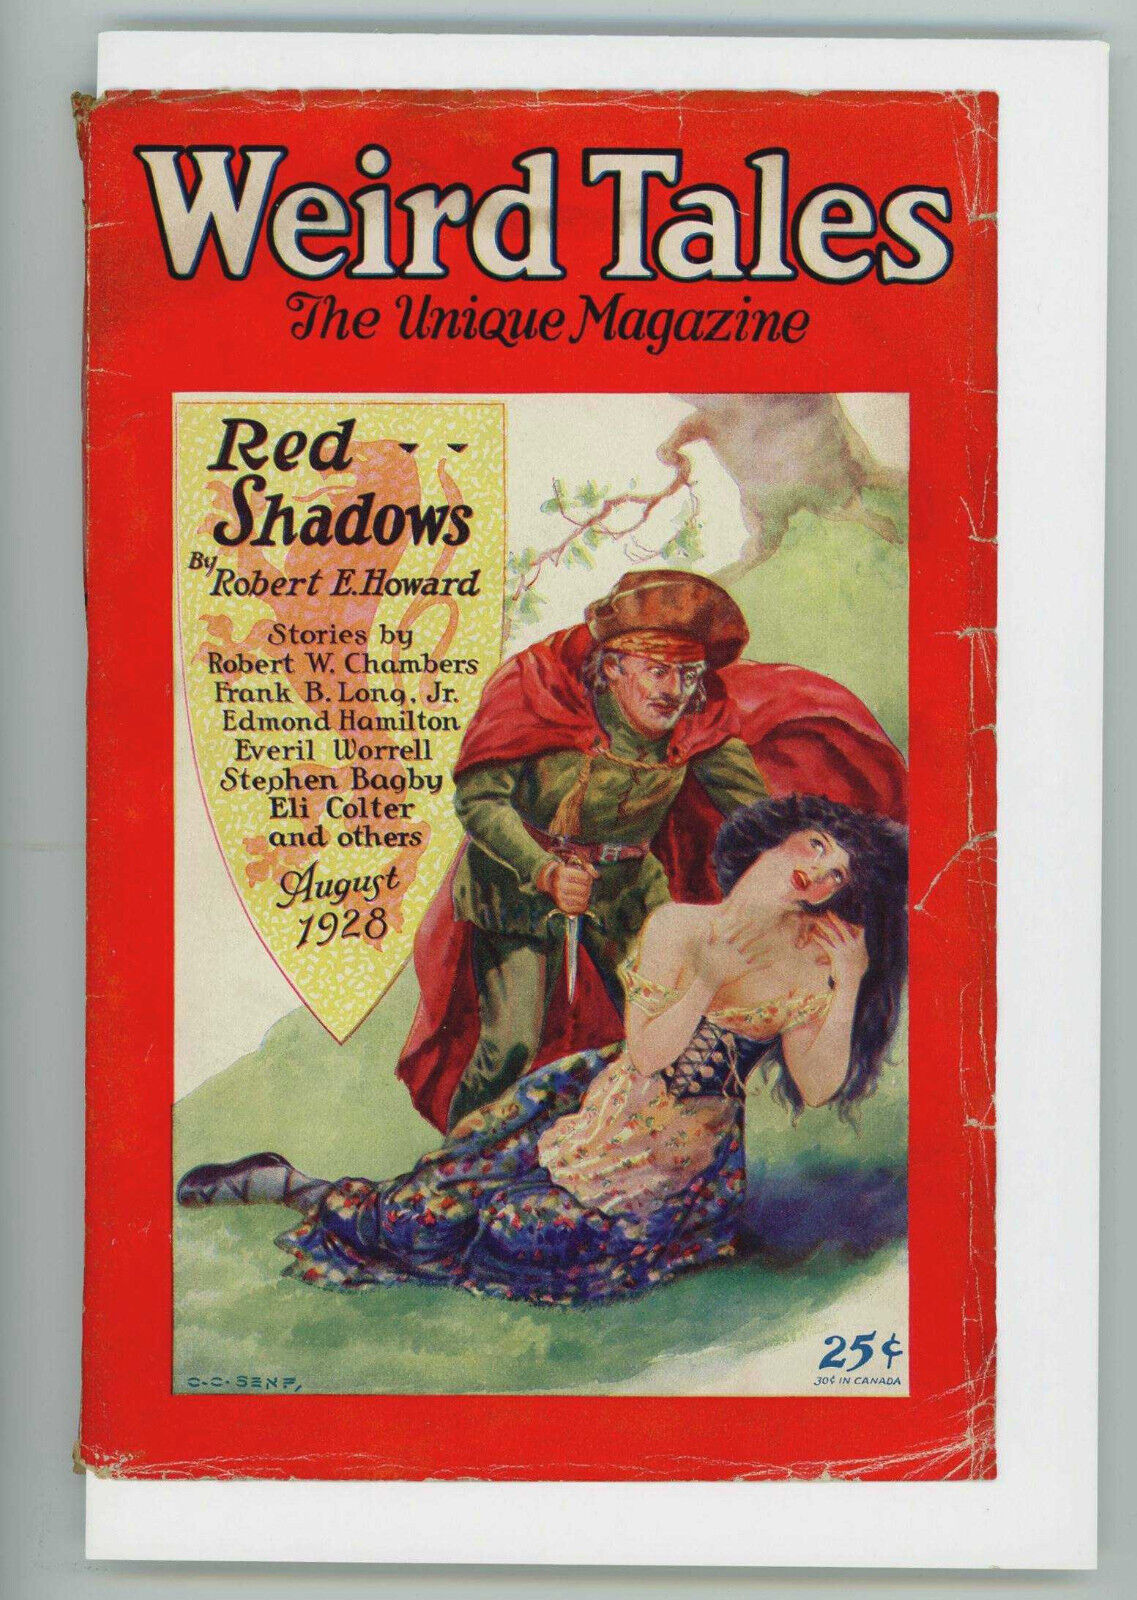 Pulp Magazine: Weird Tales, August 1928 - Robert E Howard and Tennessee Williams